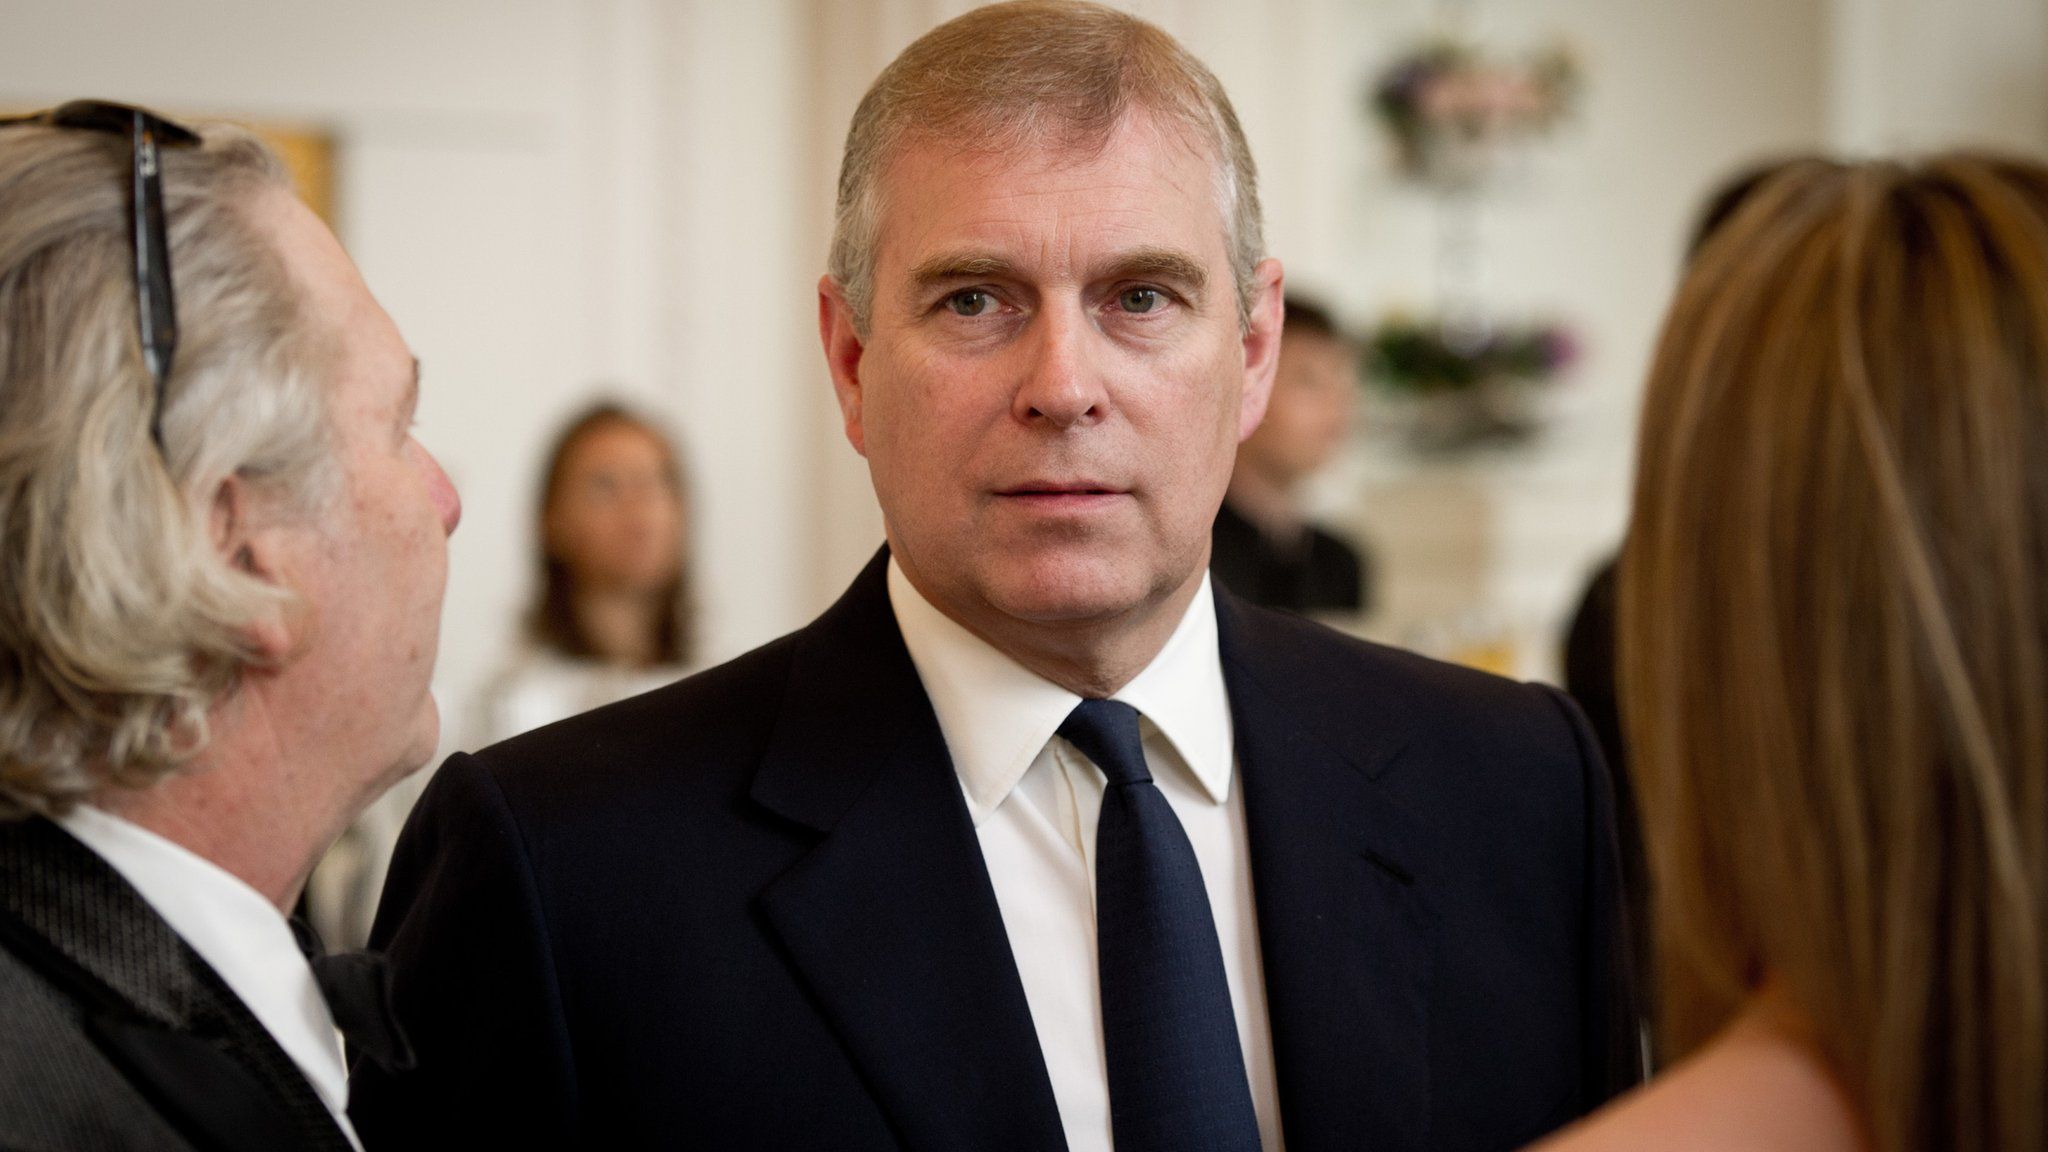 Prince Andrew, Duke of York attends the English National Ballet"s summer party at The Orangery on June 29, 2011